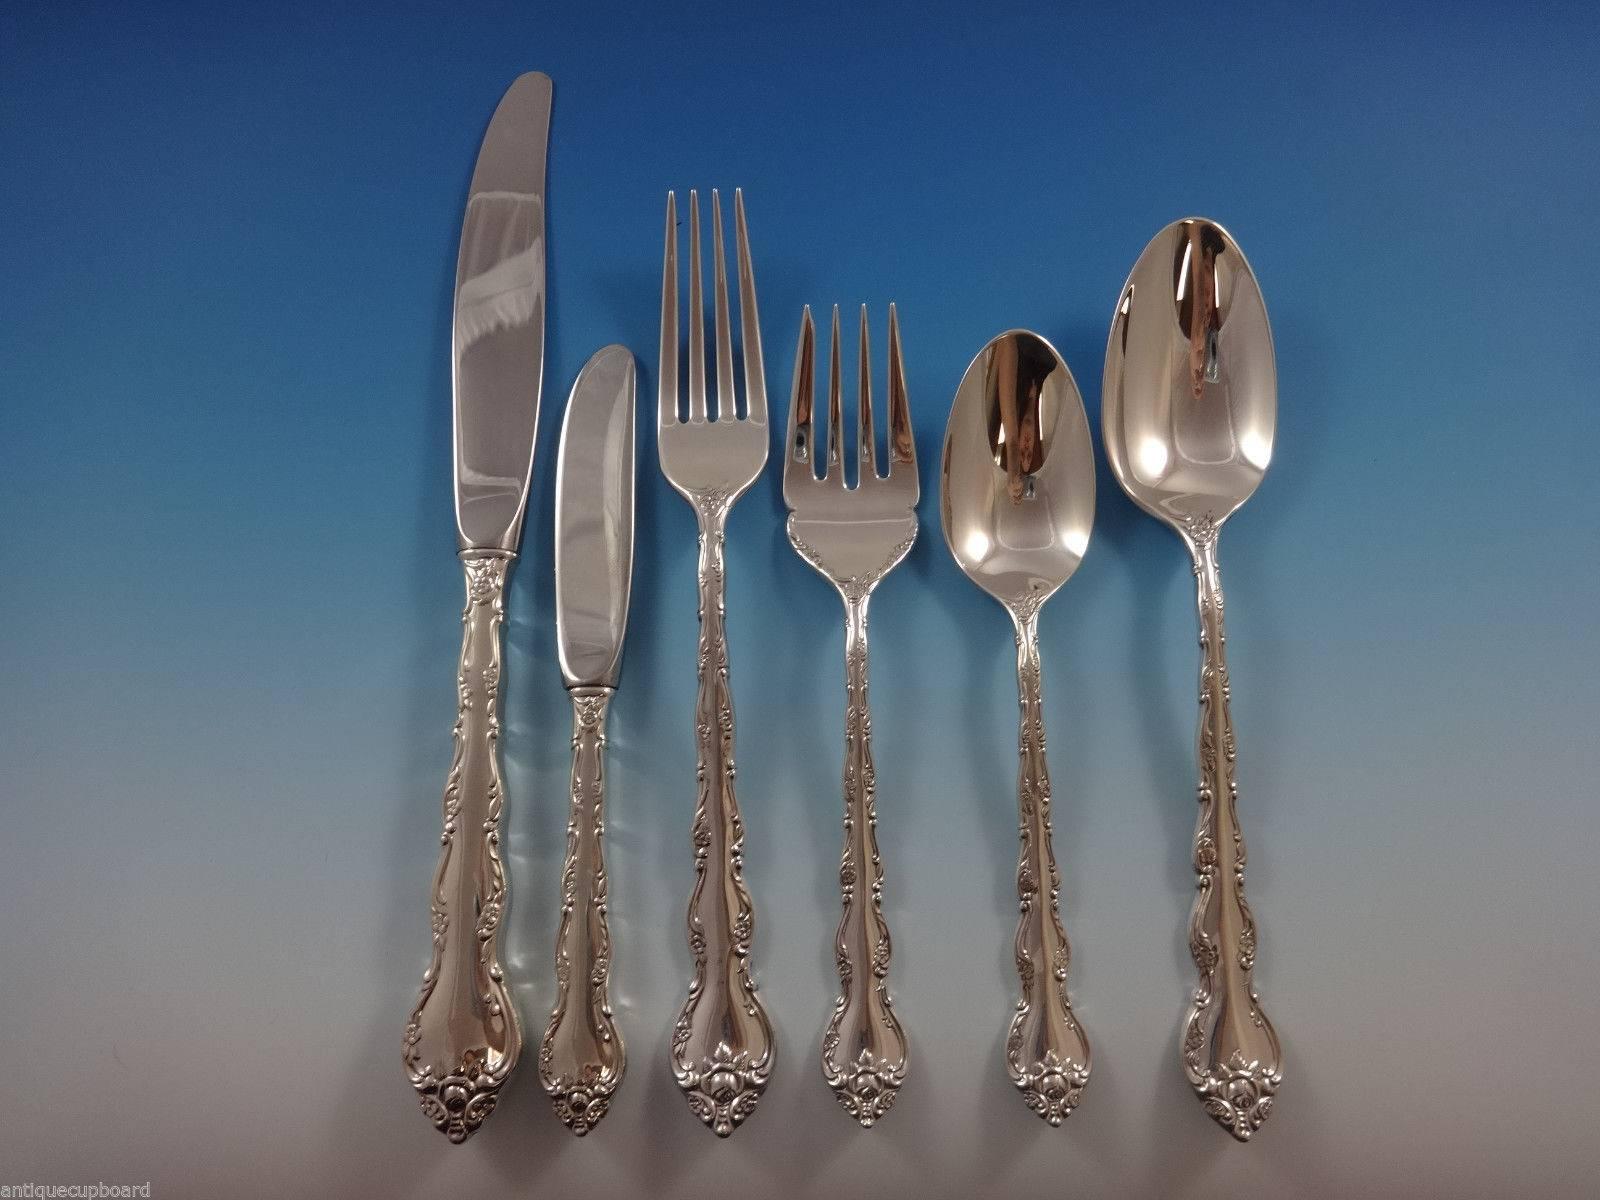 Beautiful Feliciana by Wallace sterling silver flatware set, 56 pieces. This set includes:

Eight knives, 9